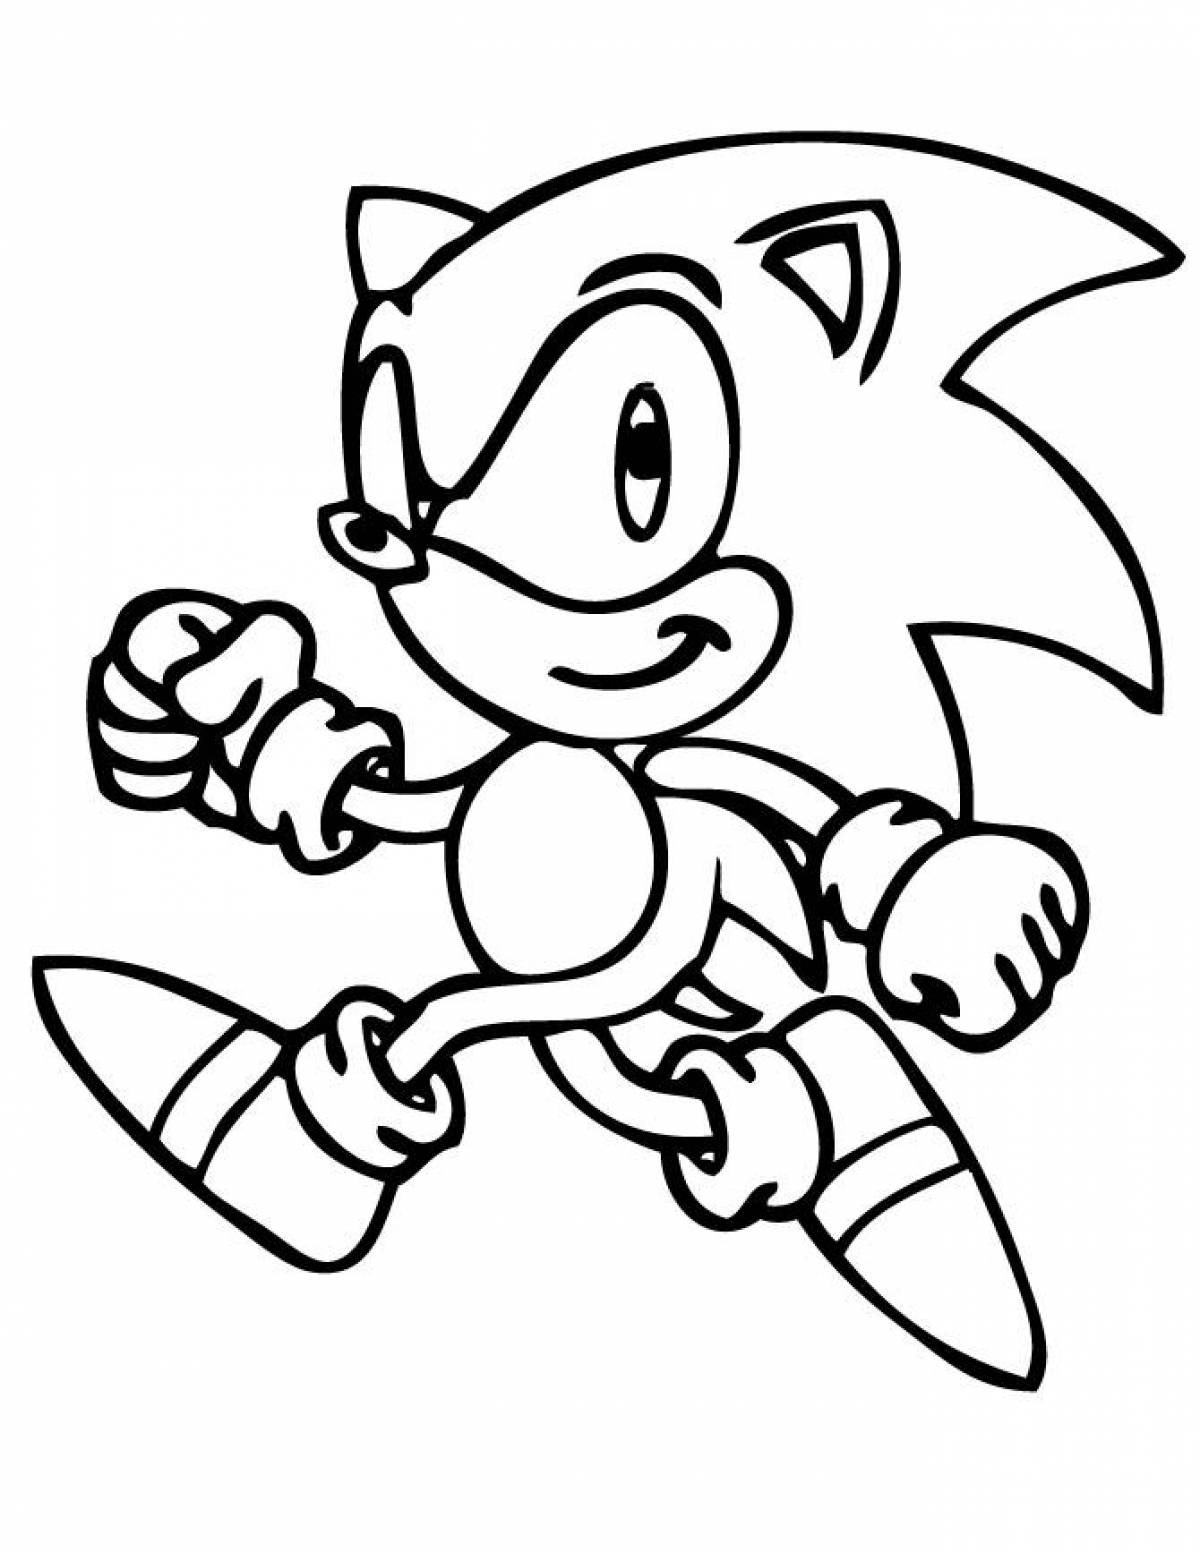 A fun sonic coloring book for kids